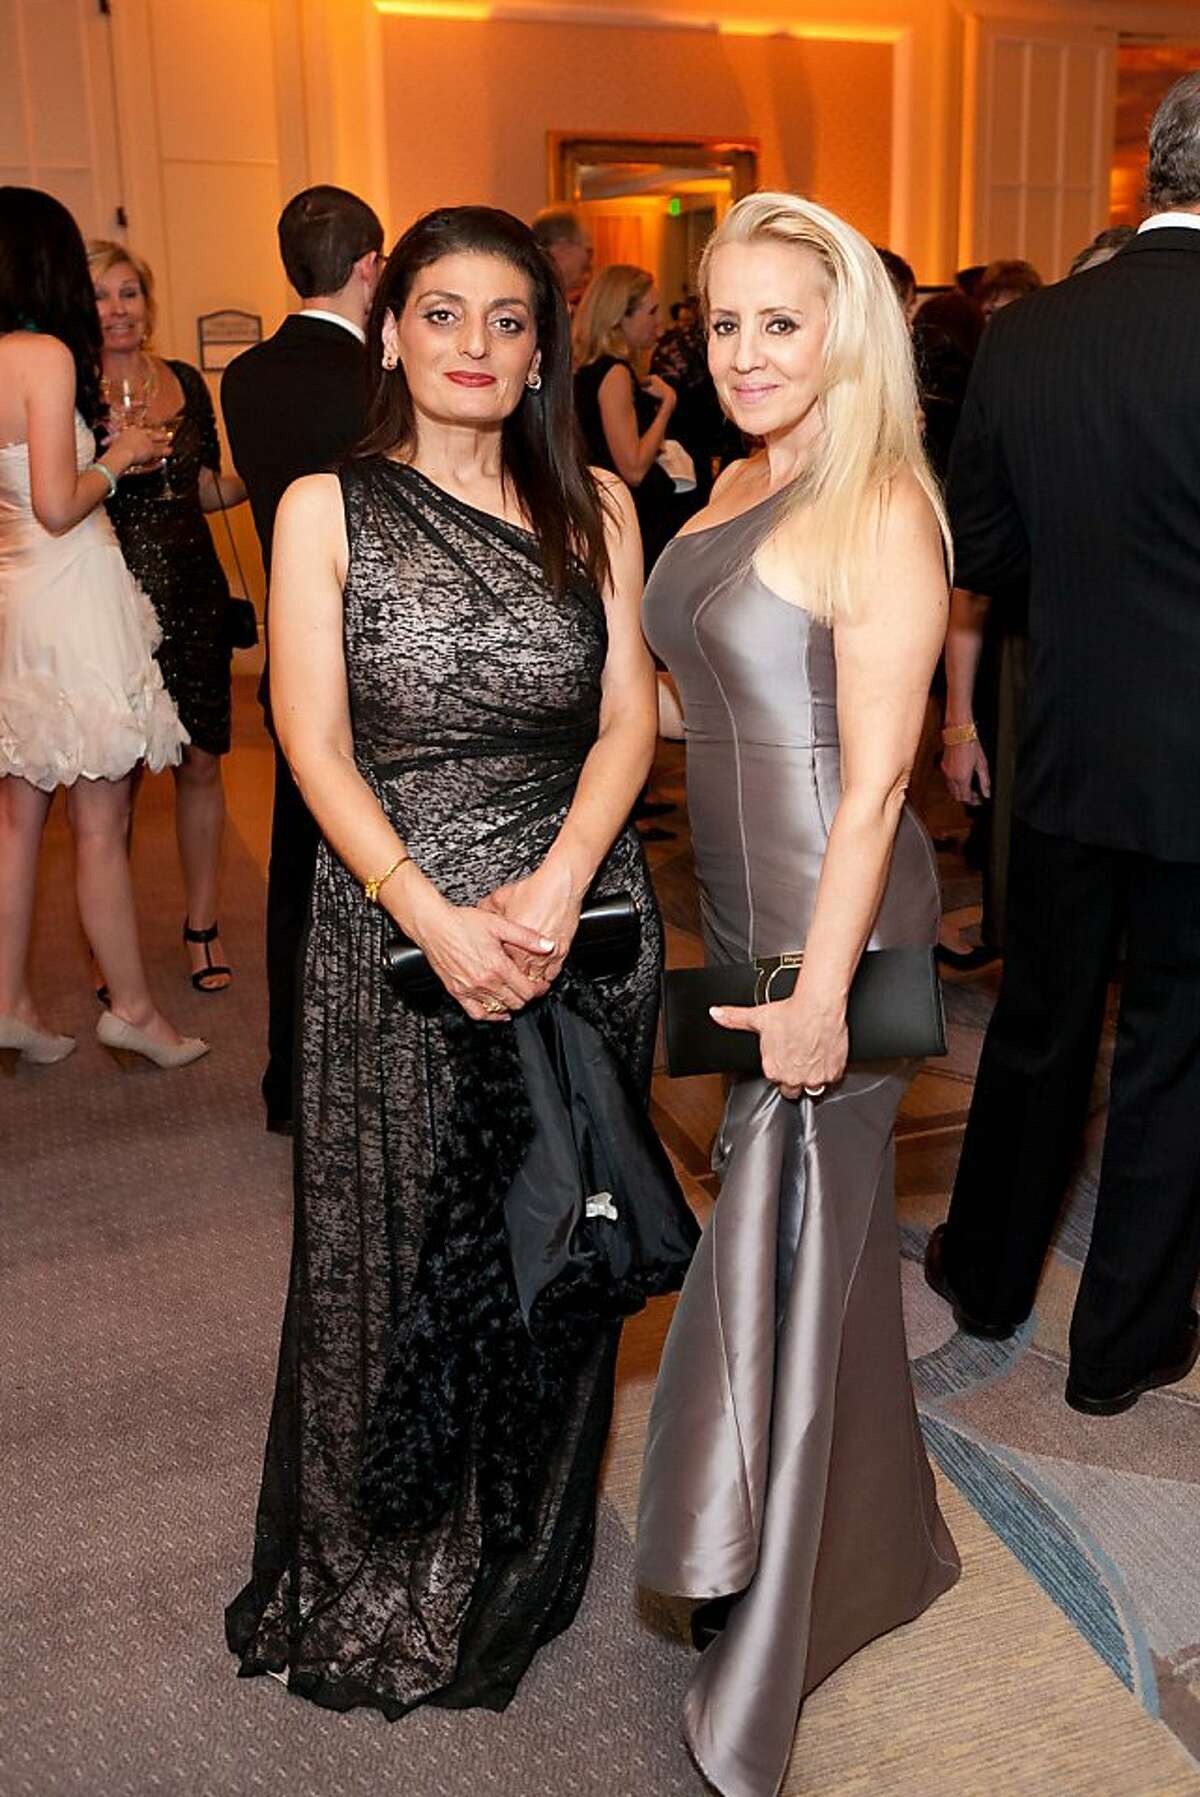 The Smuin Ballet's "Beyond Ballet" gala on Jan. 28, 2012, held at the Four Seasons in San Francisco, raised $300,000 for the nonprofit dance group. Attending the gala, from right to left, are: gala co-chair Athena Konstin and Lena Fabian.